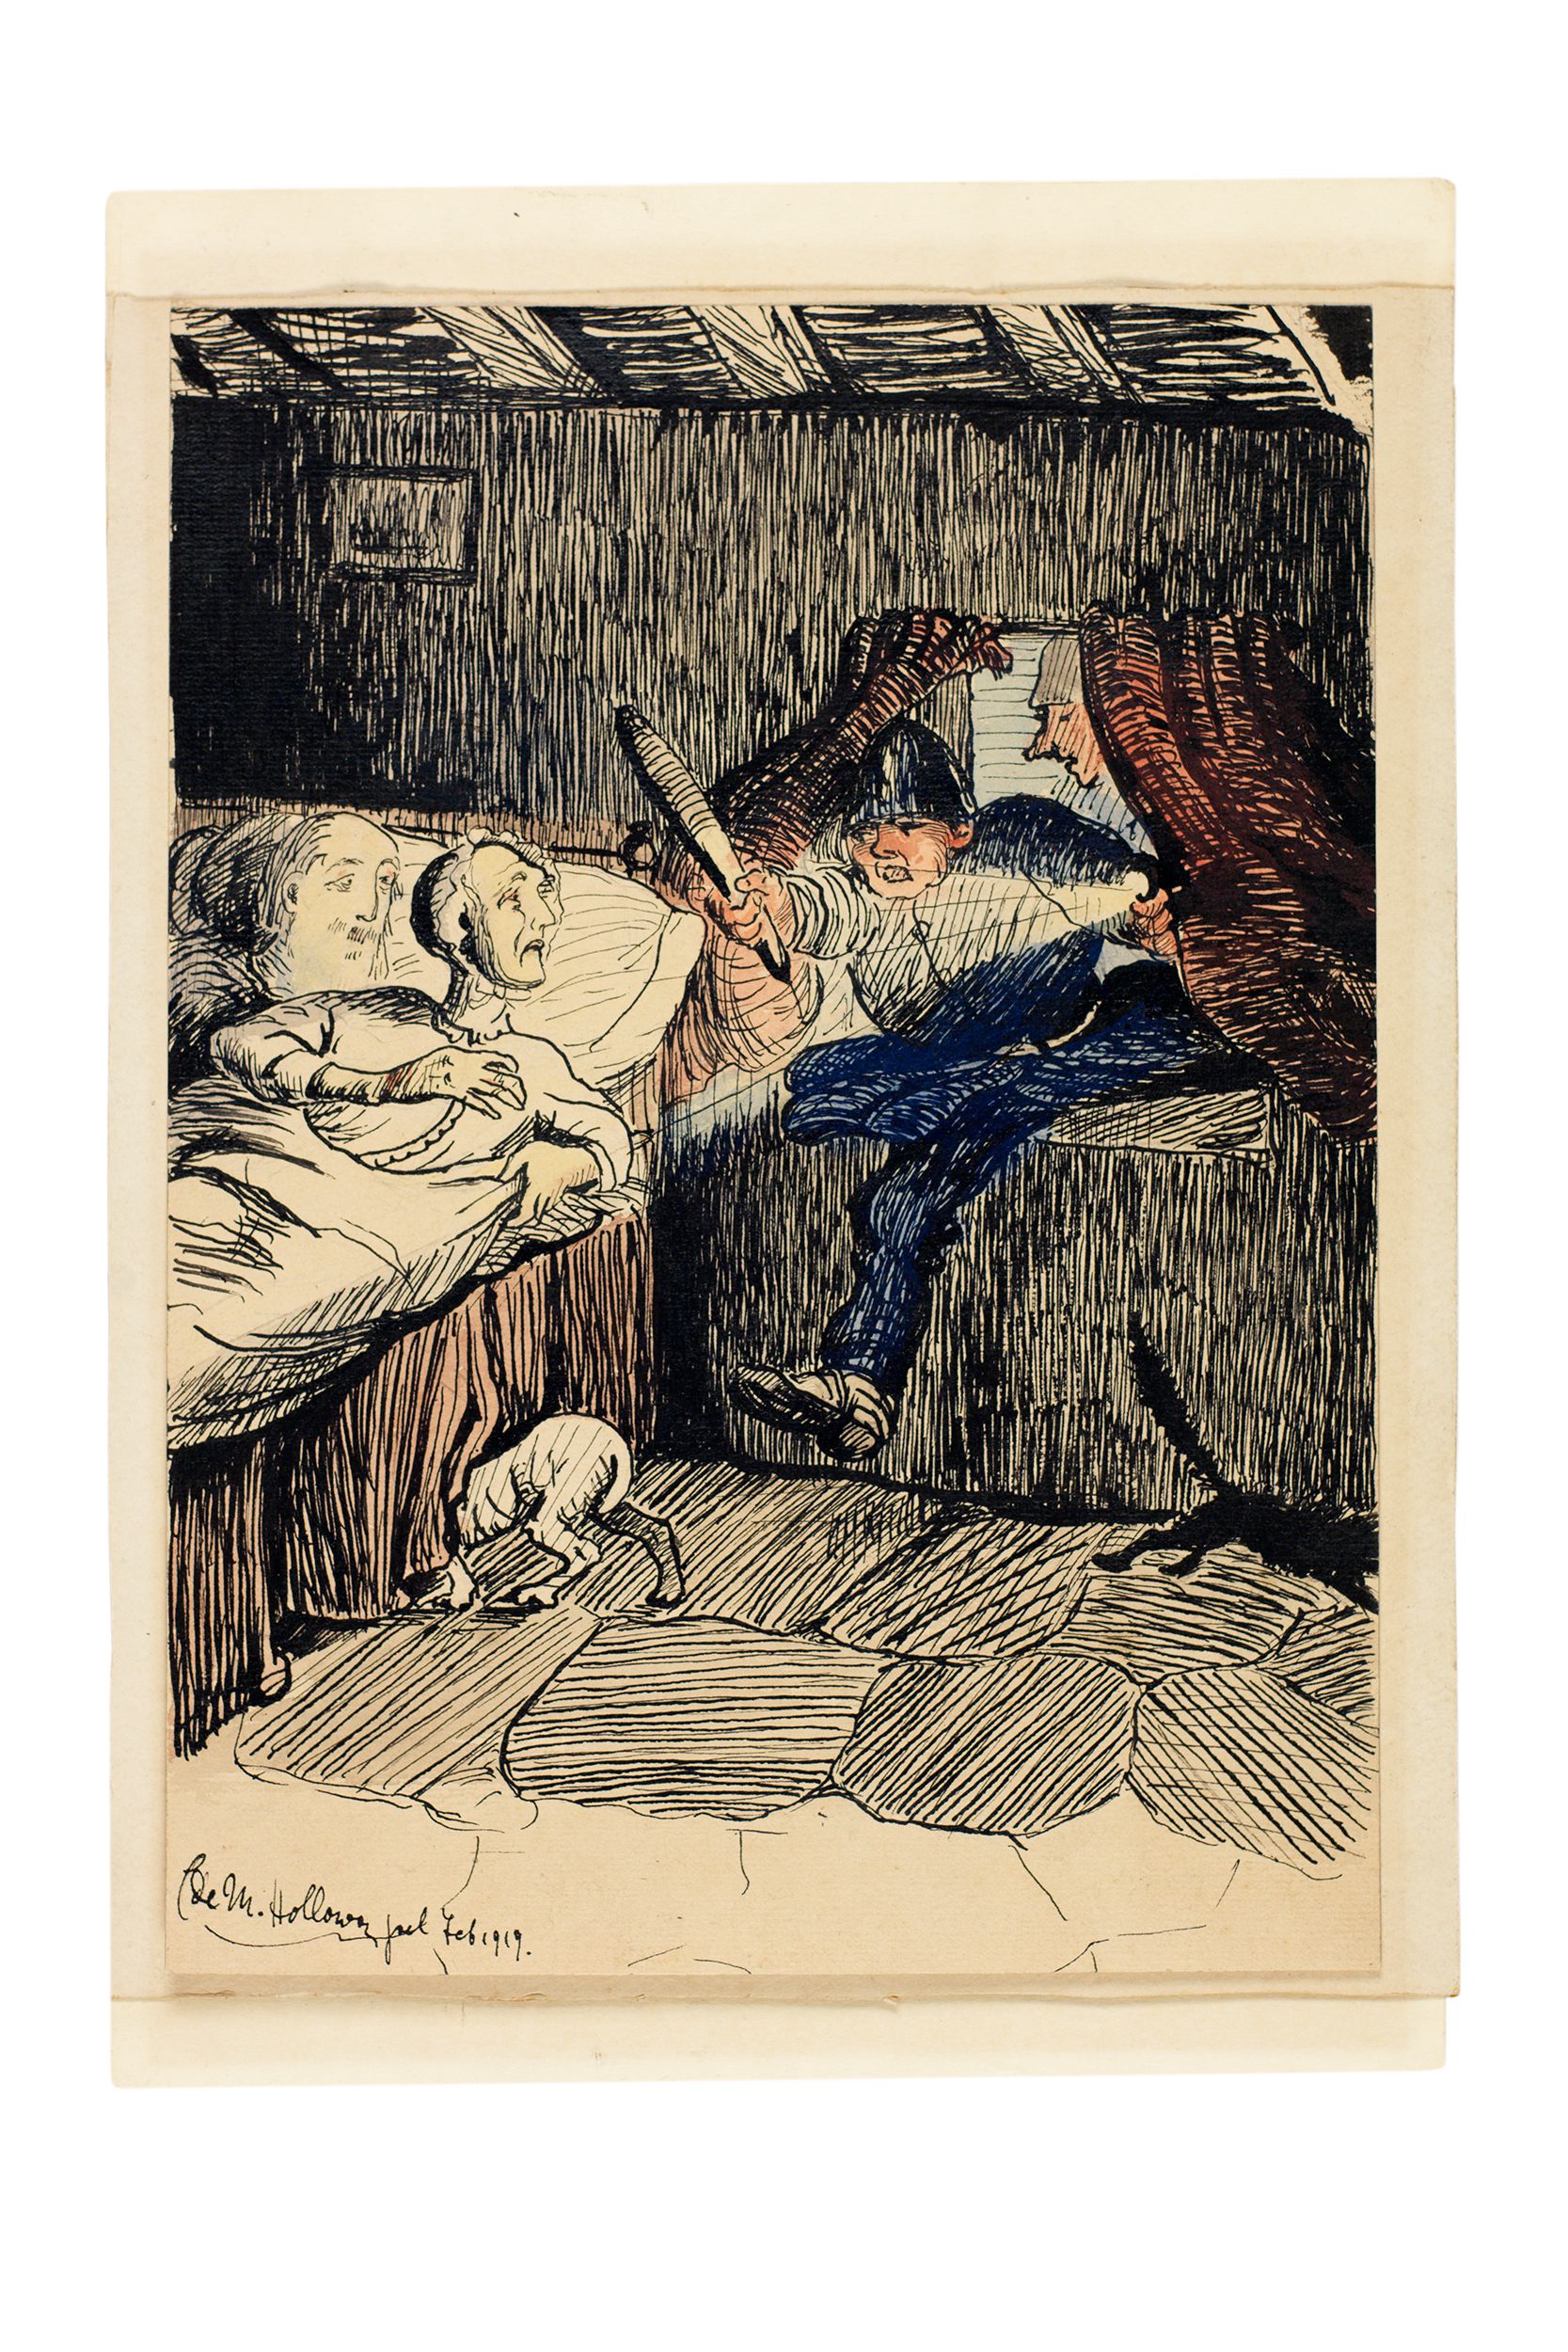 Nocturnal Raid on an Elderly Couple. Illustration made in Holloway Jail 1919.